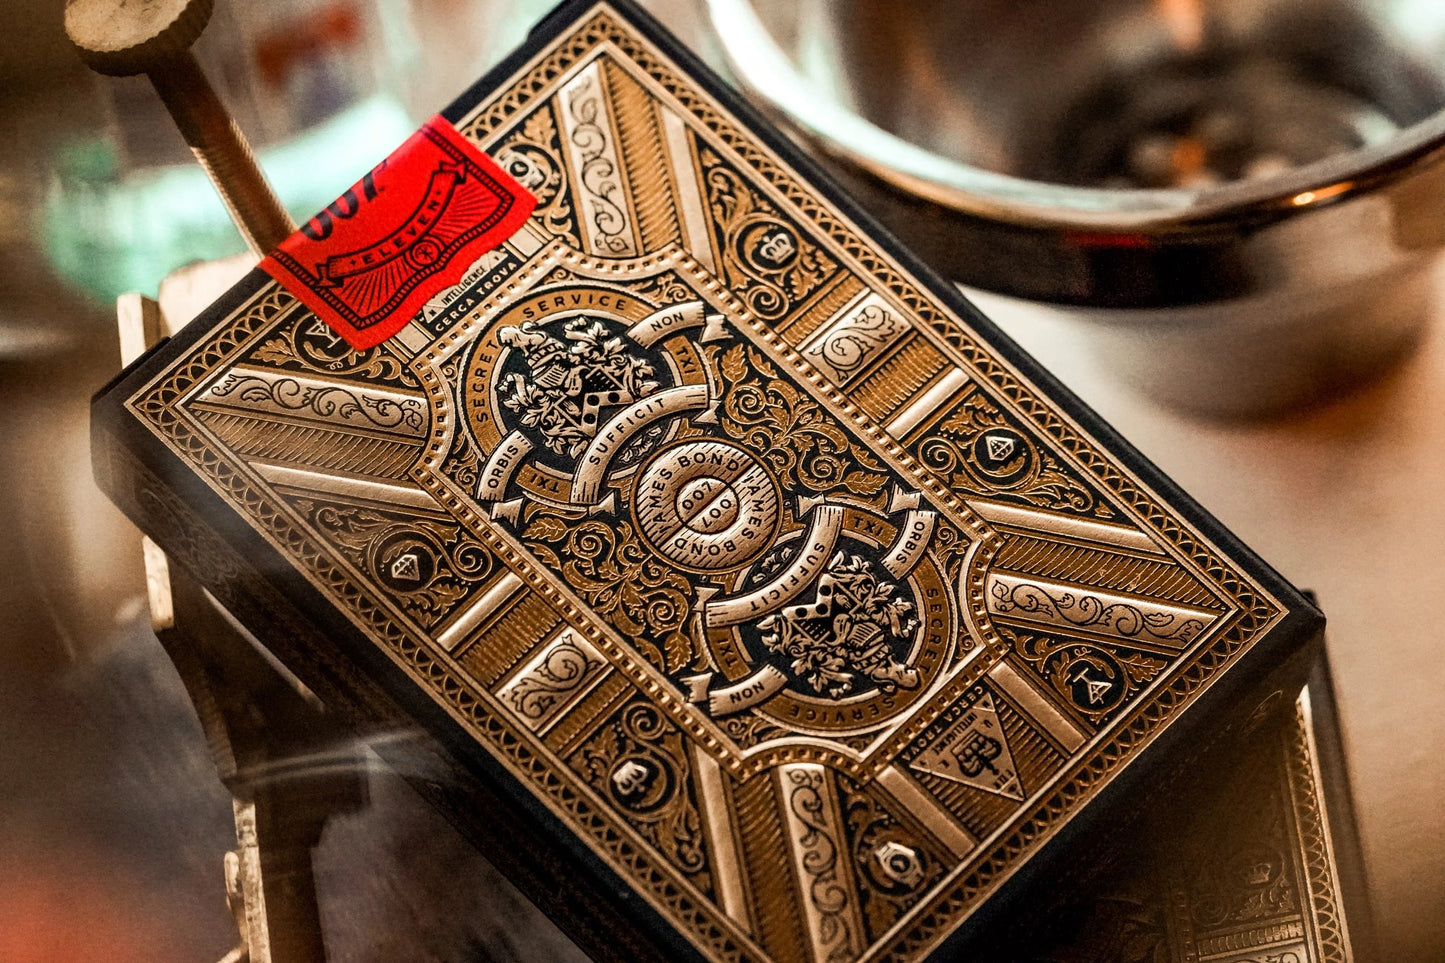 Bicycle Premium Playing Card Deck: Theory 11: James Bond 007 Gilded Embossed Cards